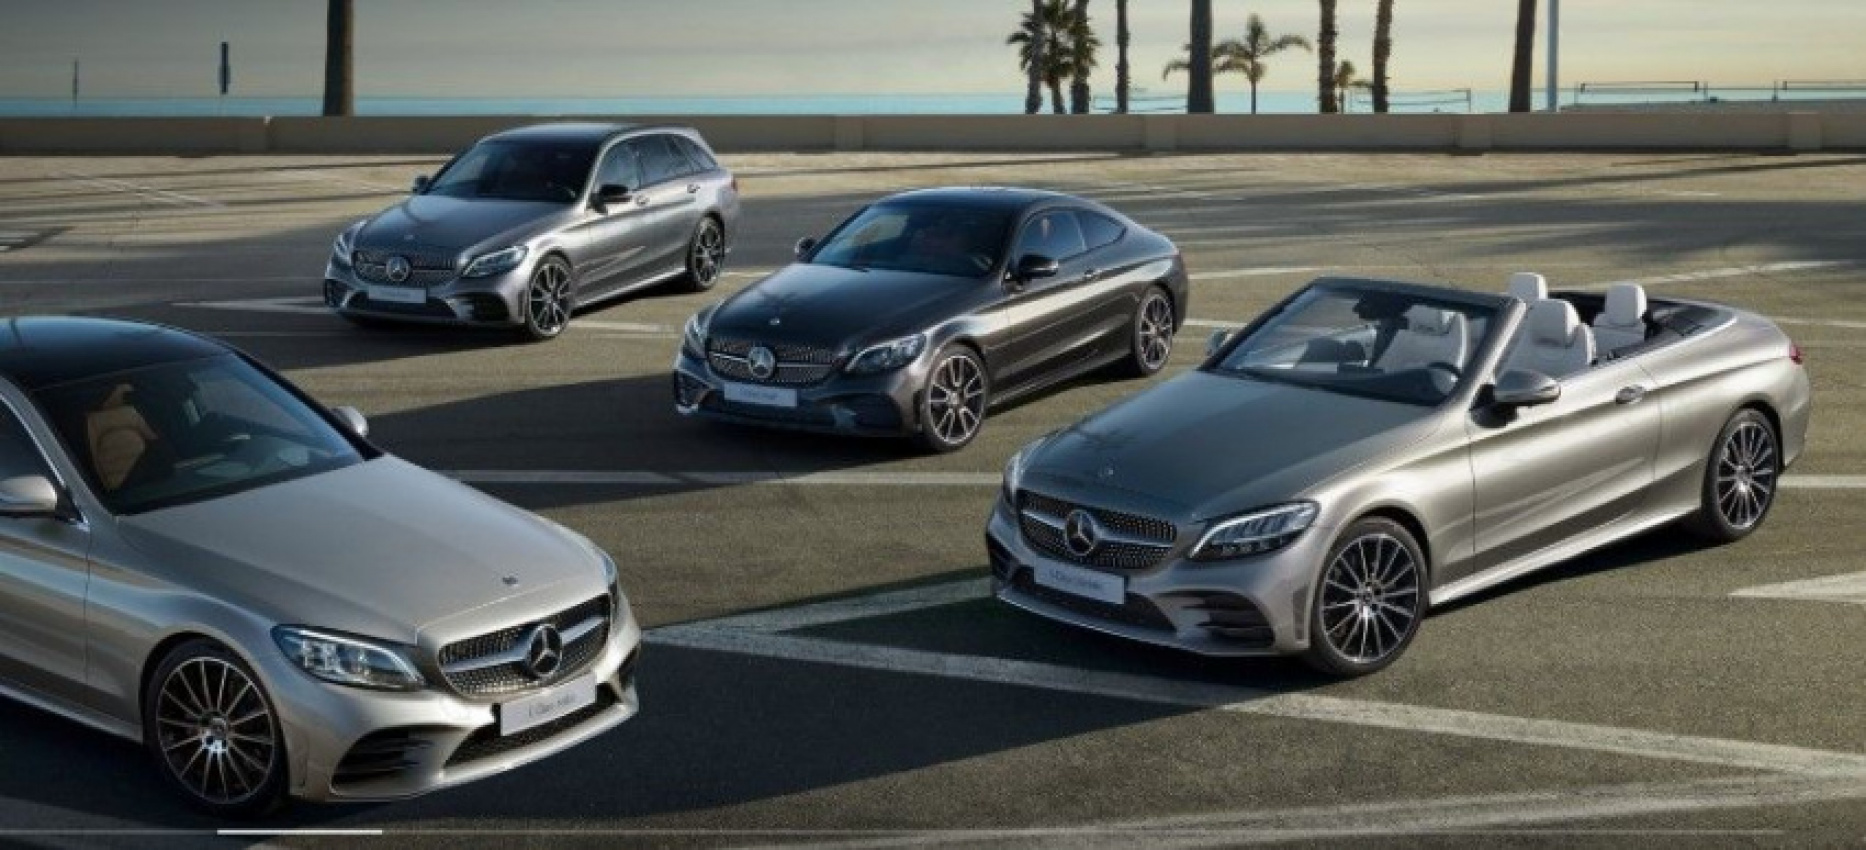 autos, cars, mercedes-benz, auto news, c-class, cle, diesel mercedes, e-class, mercedes, mercedes coupe, mercedes-benz malaysia, mercedes benz cle: another day another new mercedes model